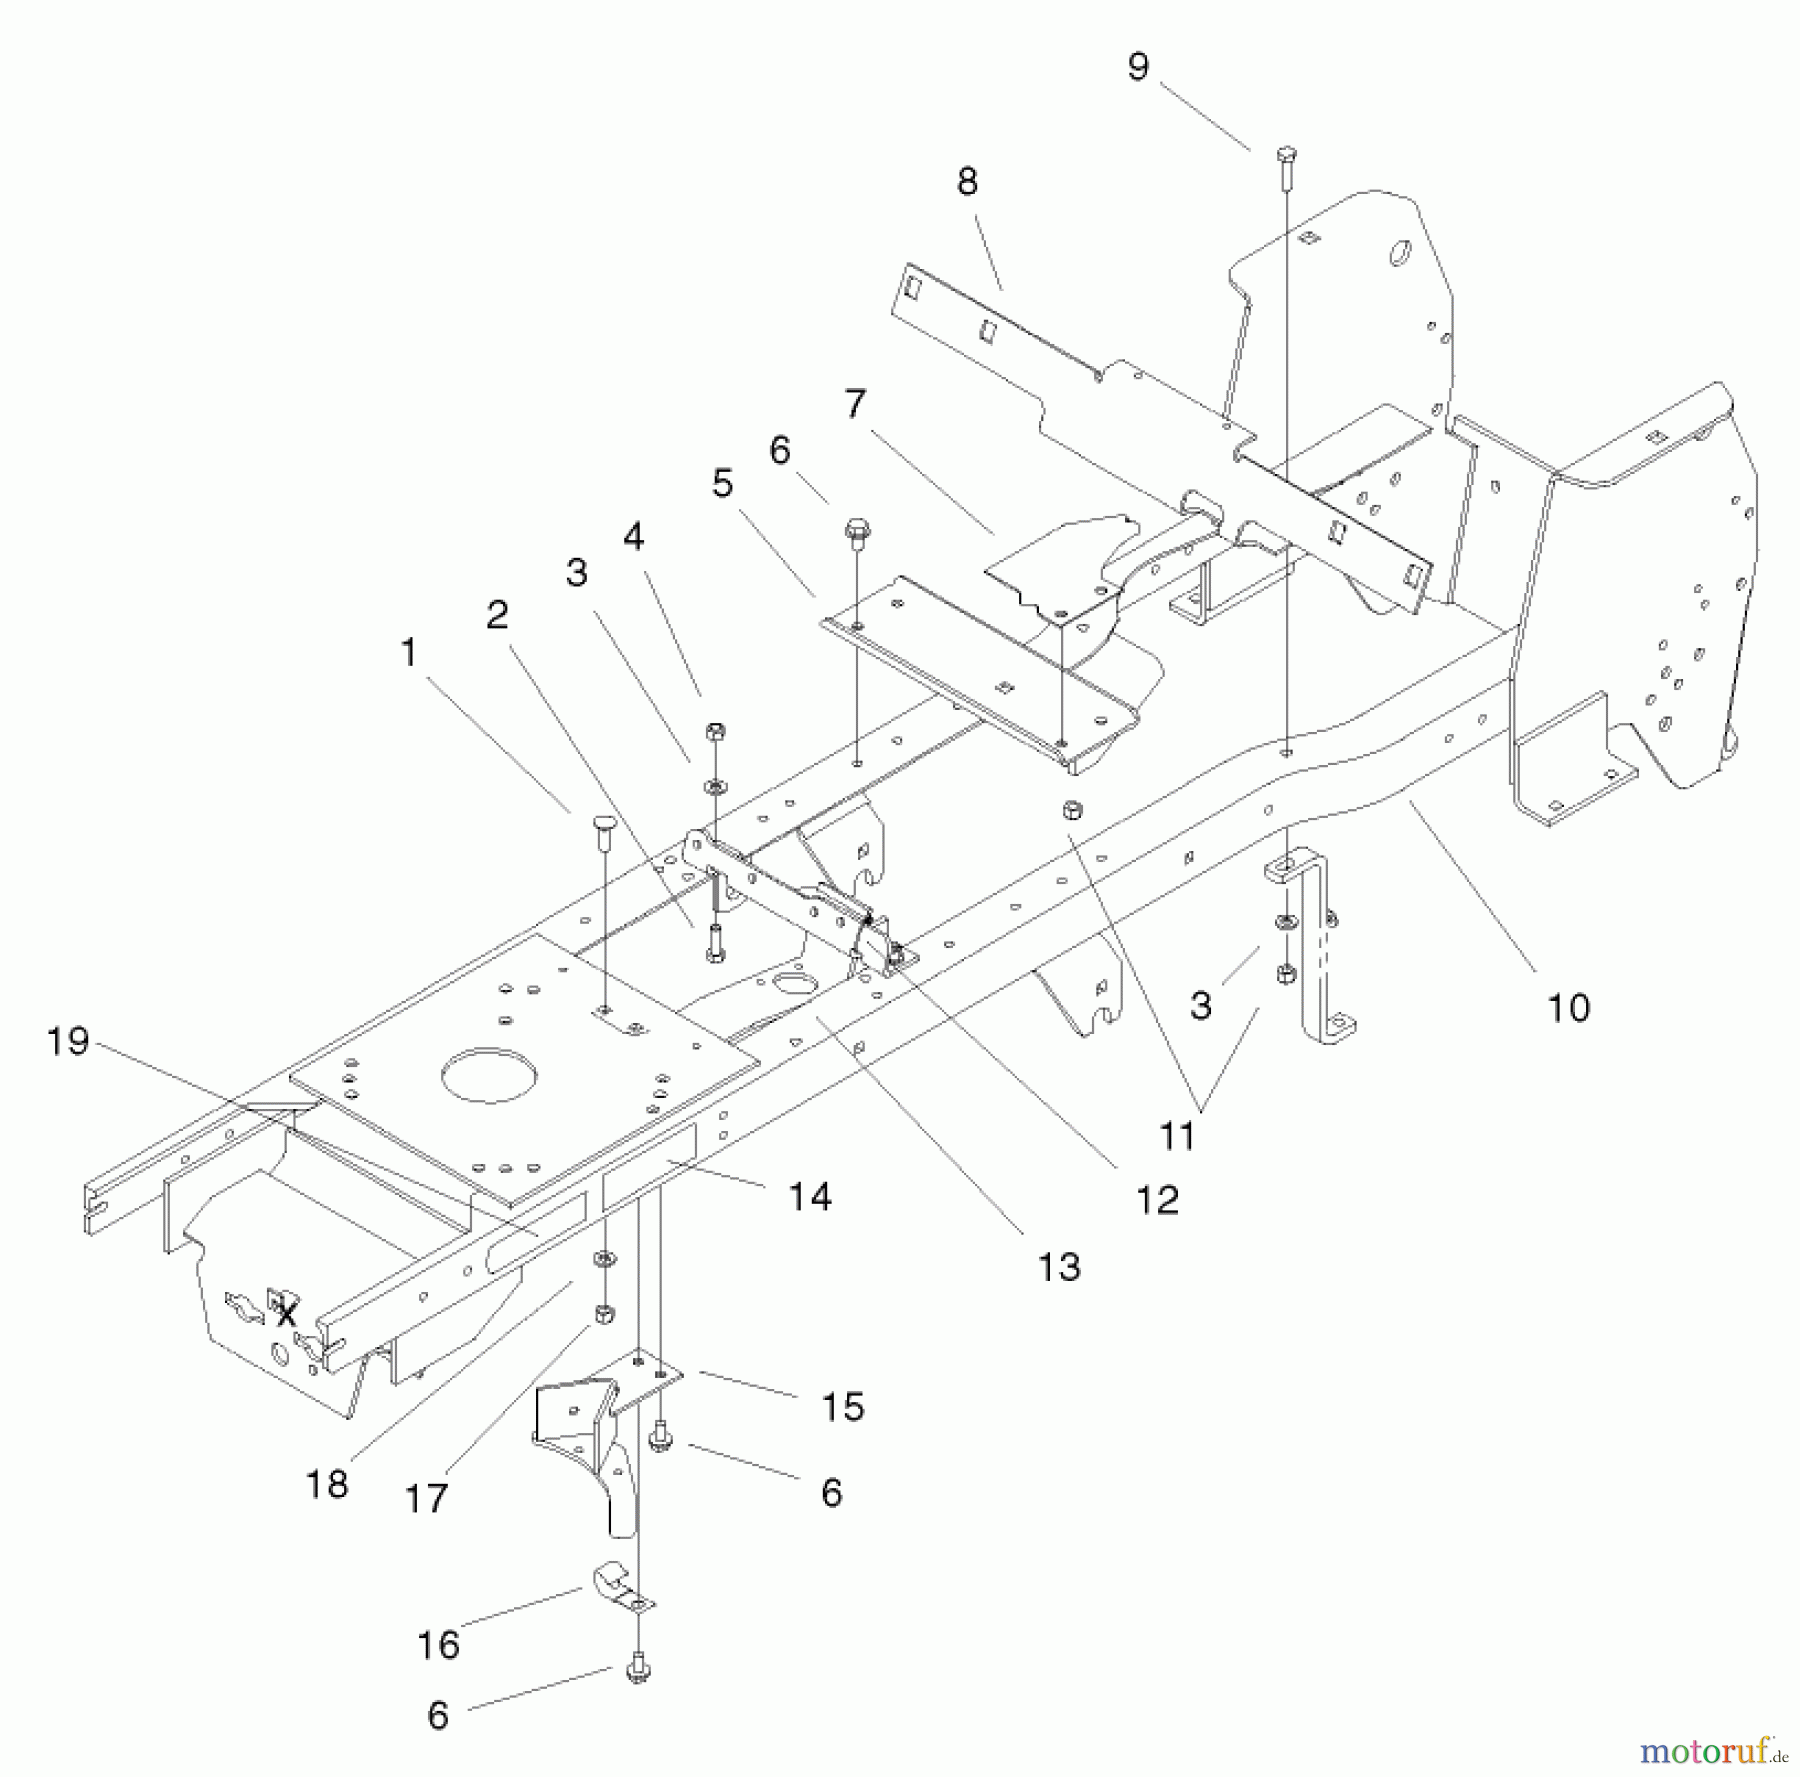  Toro Neu Mowers, Lawn & Garden Tractor Seite 1 72108 (270-H) - Toro 270-H Lawn and Garden Tractor, 2000 (200000001-200999999) FRAME ASSEMBLY